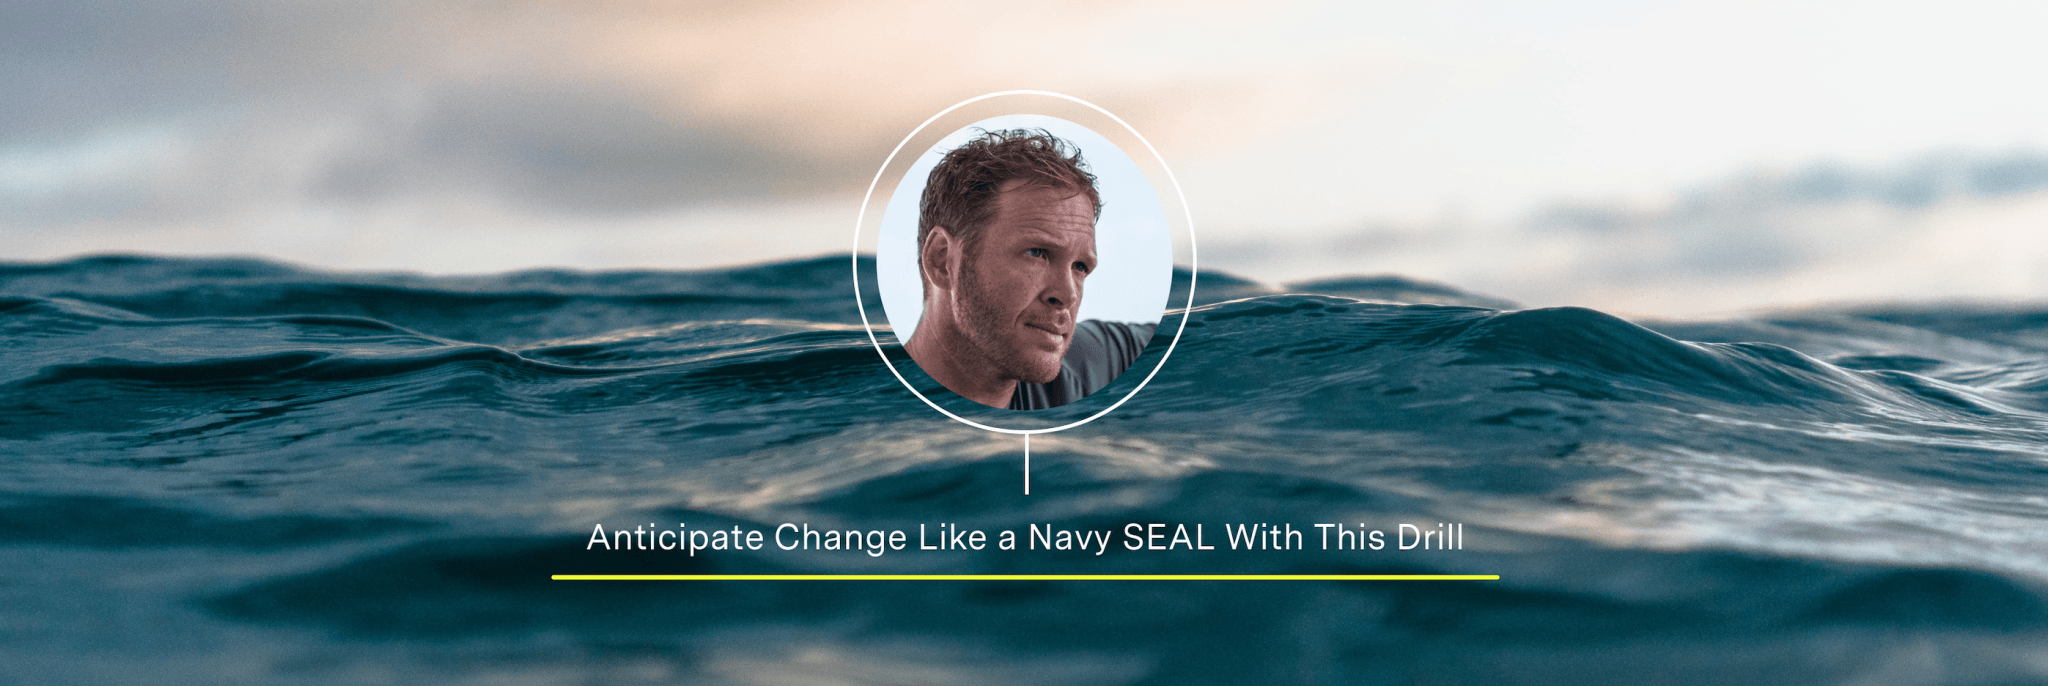 Anticipate change like a Navy SEAL – try this drill. | Madefor